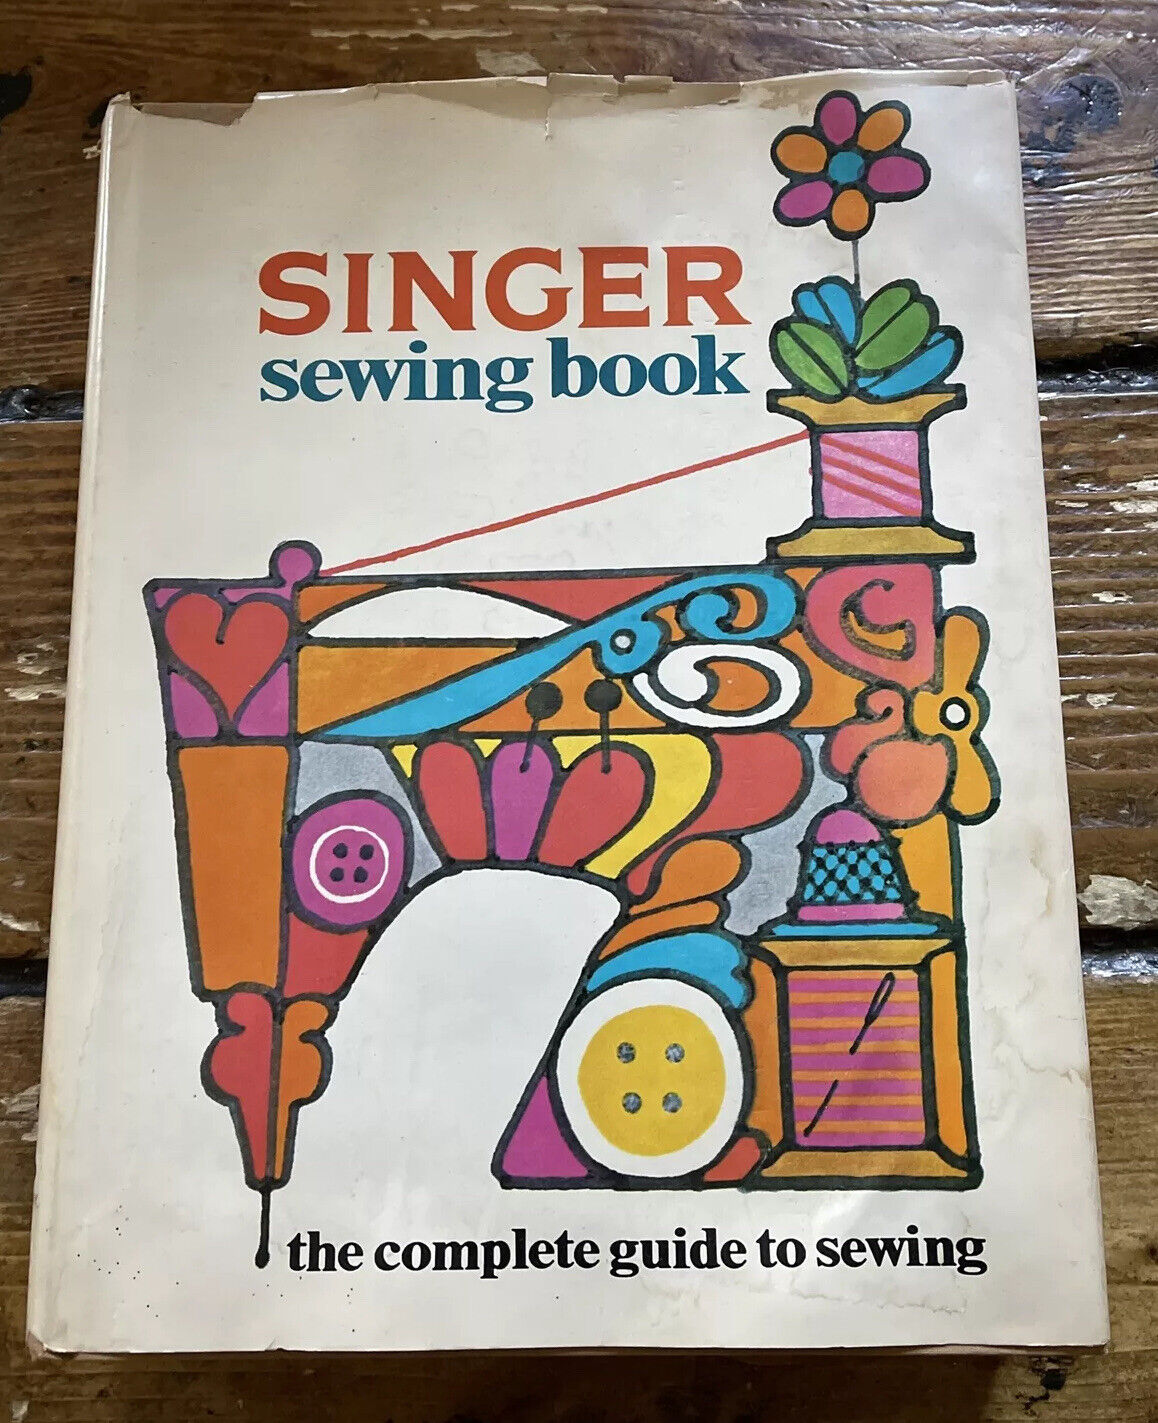 1969 Singer Sewing Book First Edition HB w/ Dust Jacket Complete Guide To Sewing